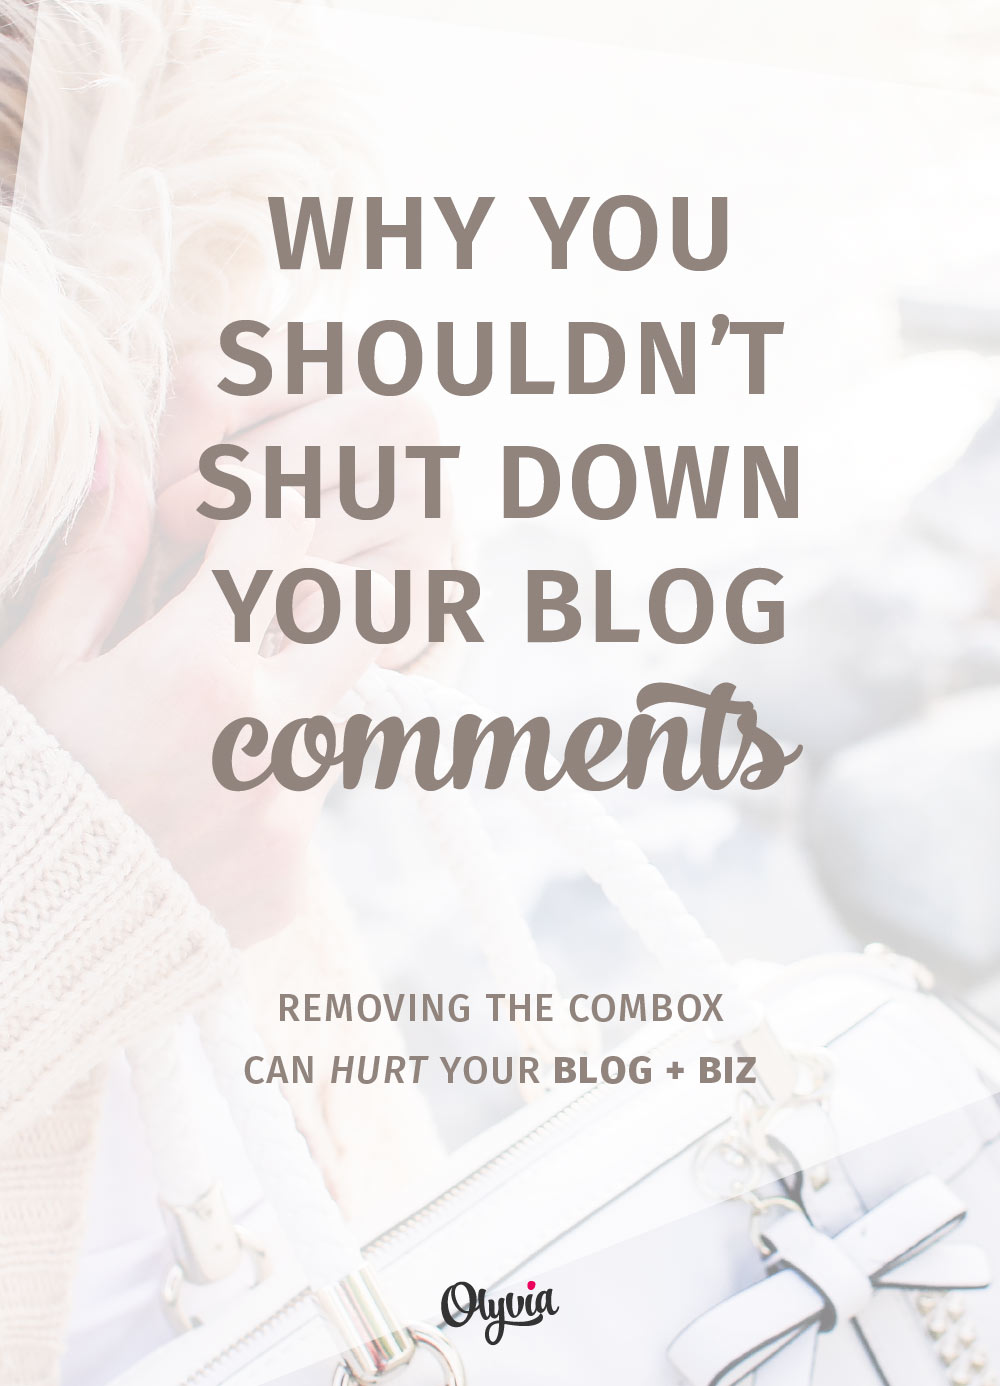 Everyone's asking: Should I turn off my blog comments? Before you shut them down, learn how it can hurt your blog and your business... And what you can do instead.